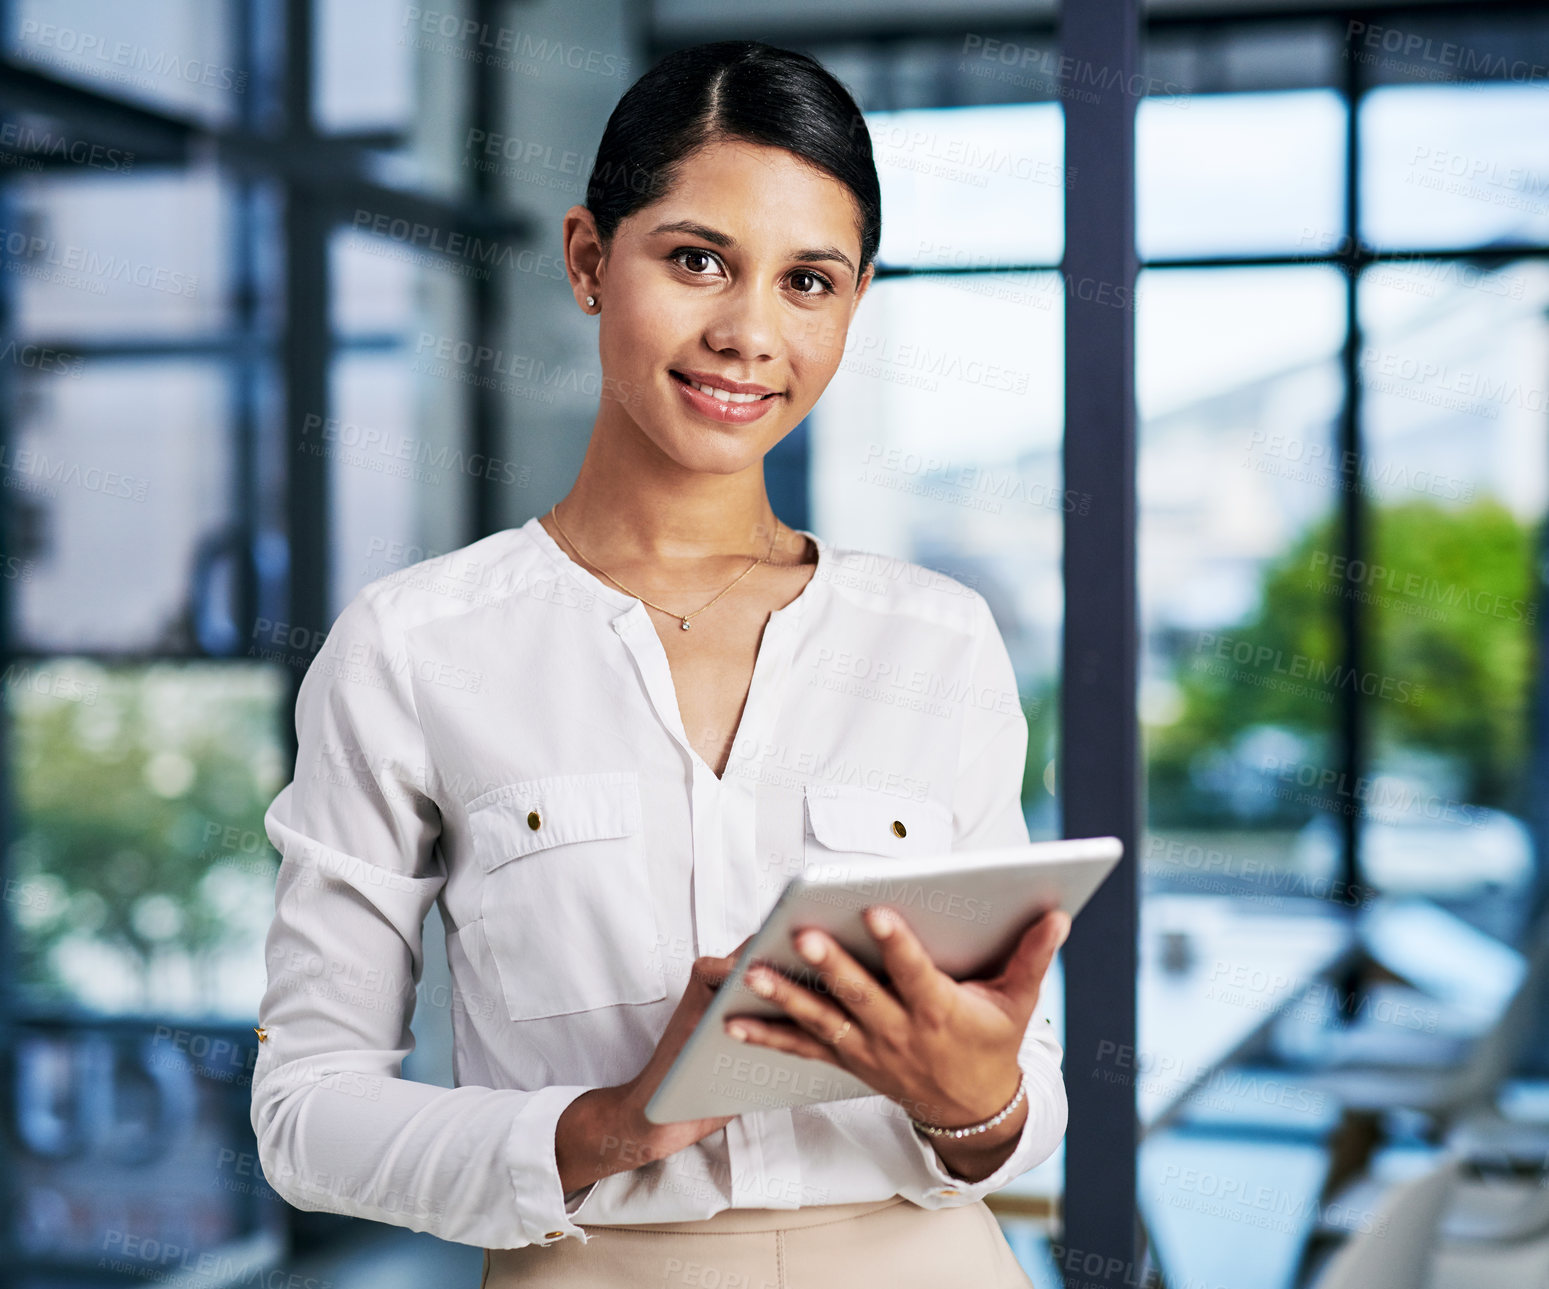 Buy stock photo Cropped portrait of an attractive young businesswoman smiling while using a digital tablet while standing in a modern office